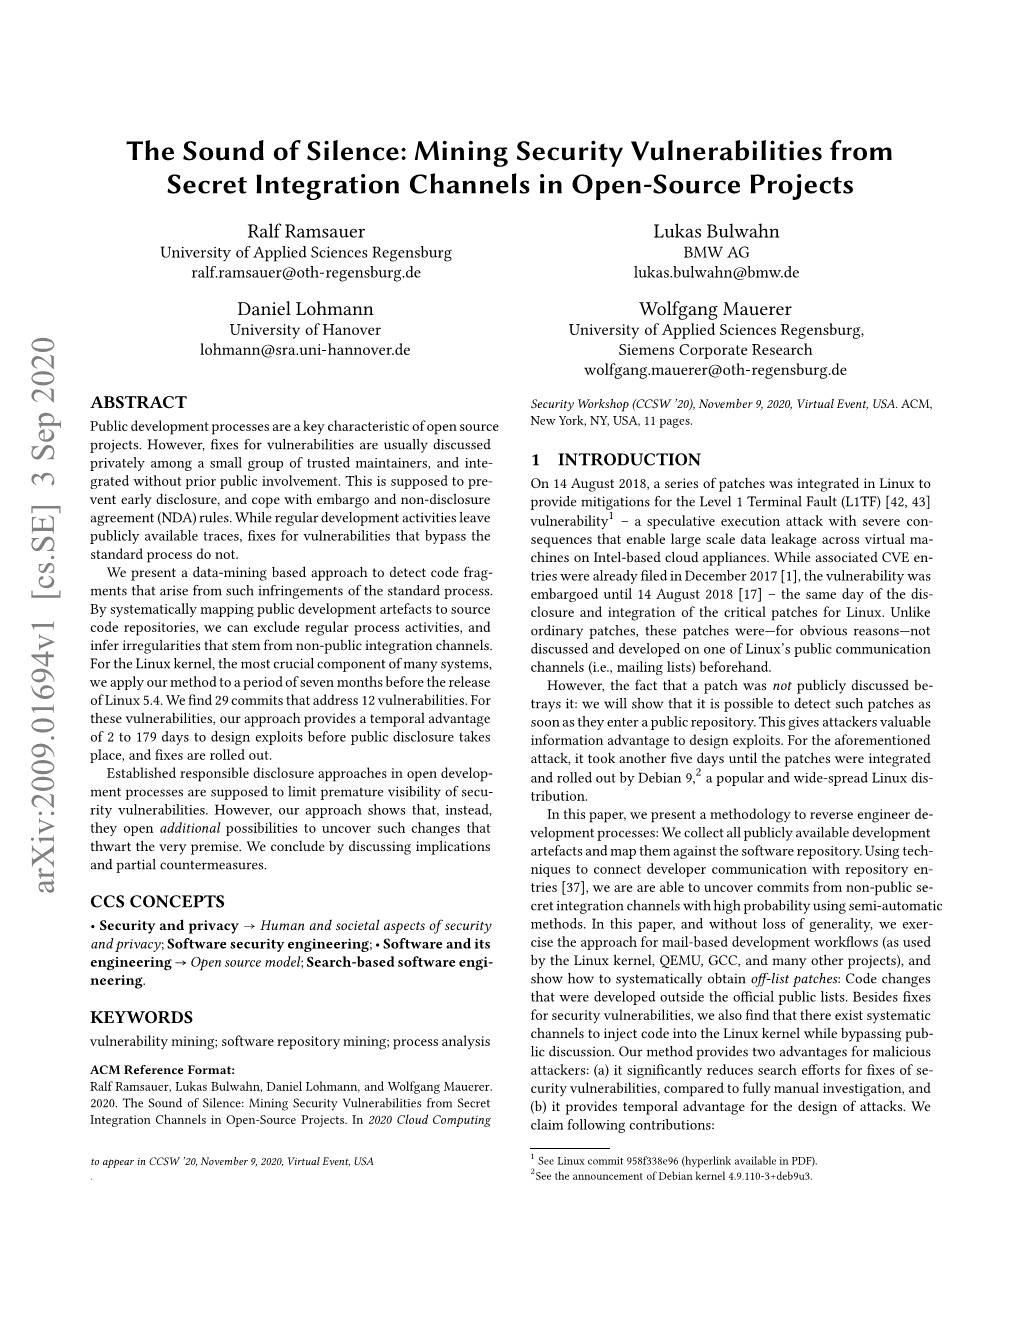 Mining Security Vulnerabilities from Secret Integration Channels